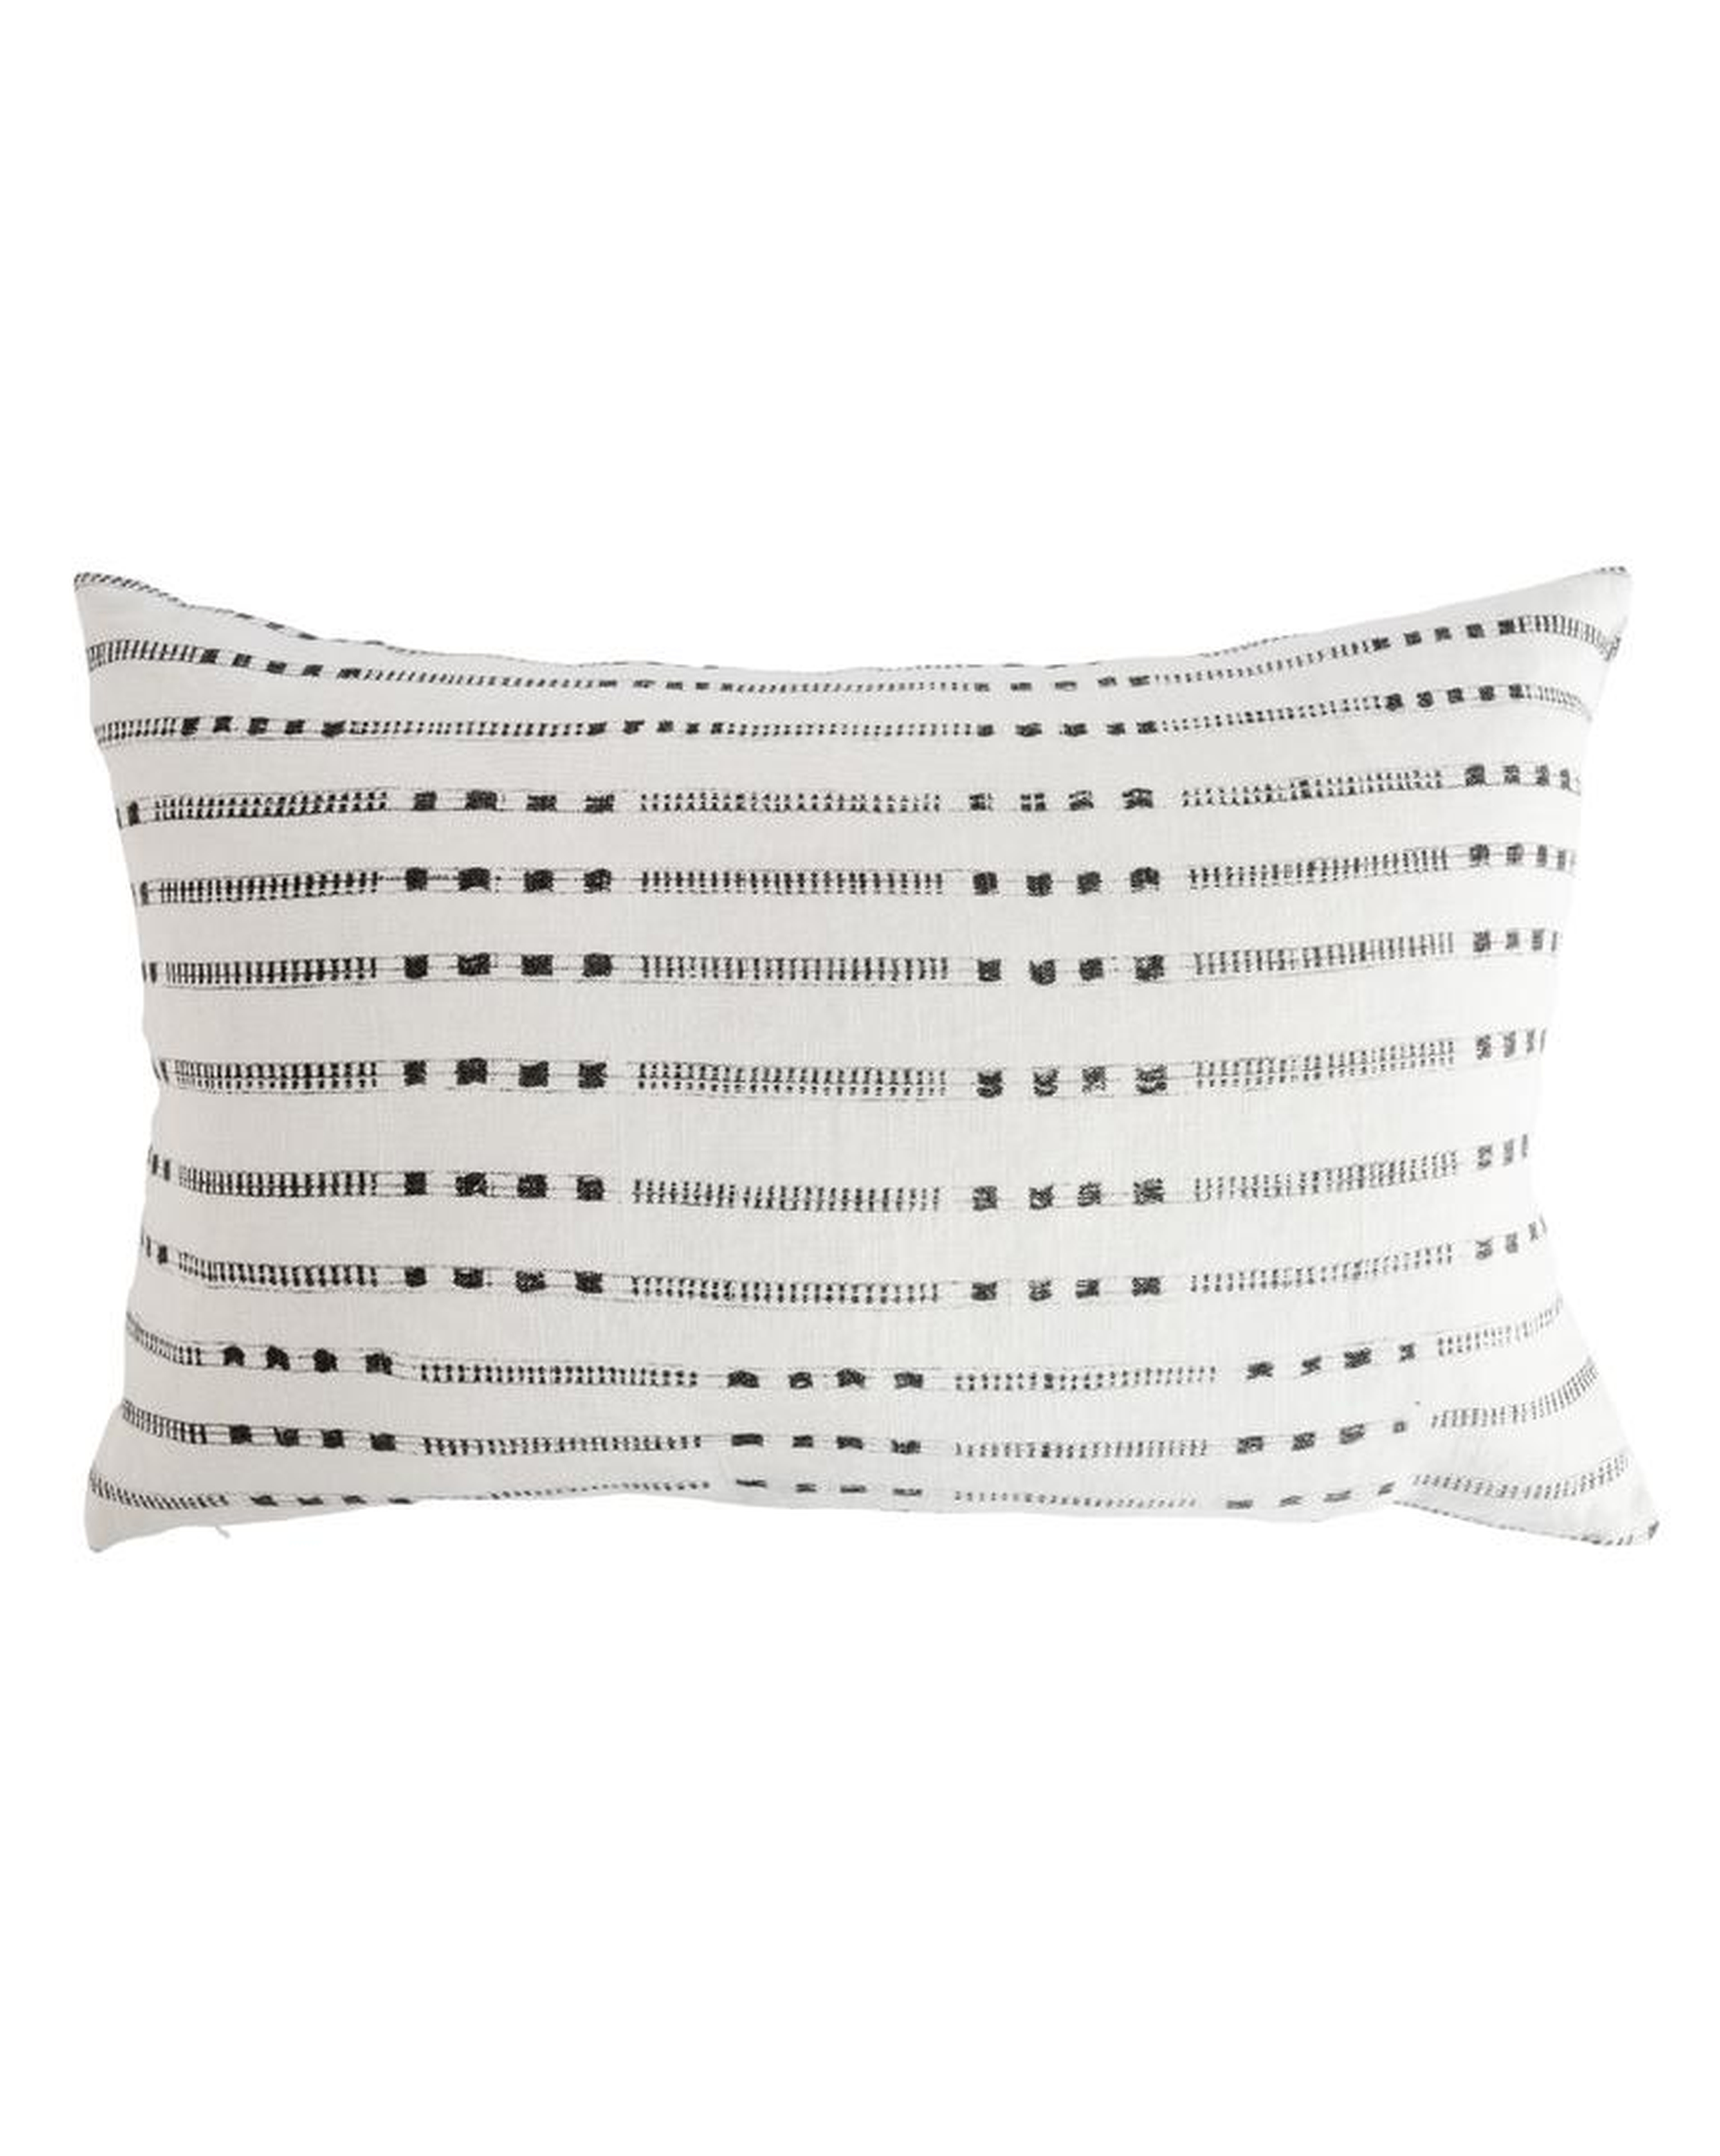 SHIVA PILLOW WITH DOWN INSERT - McGee & Co.